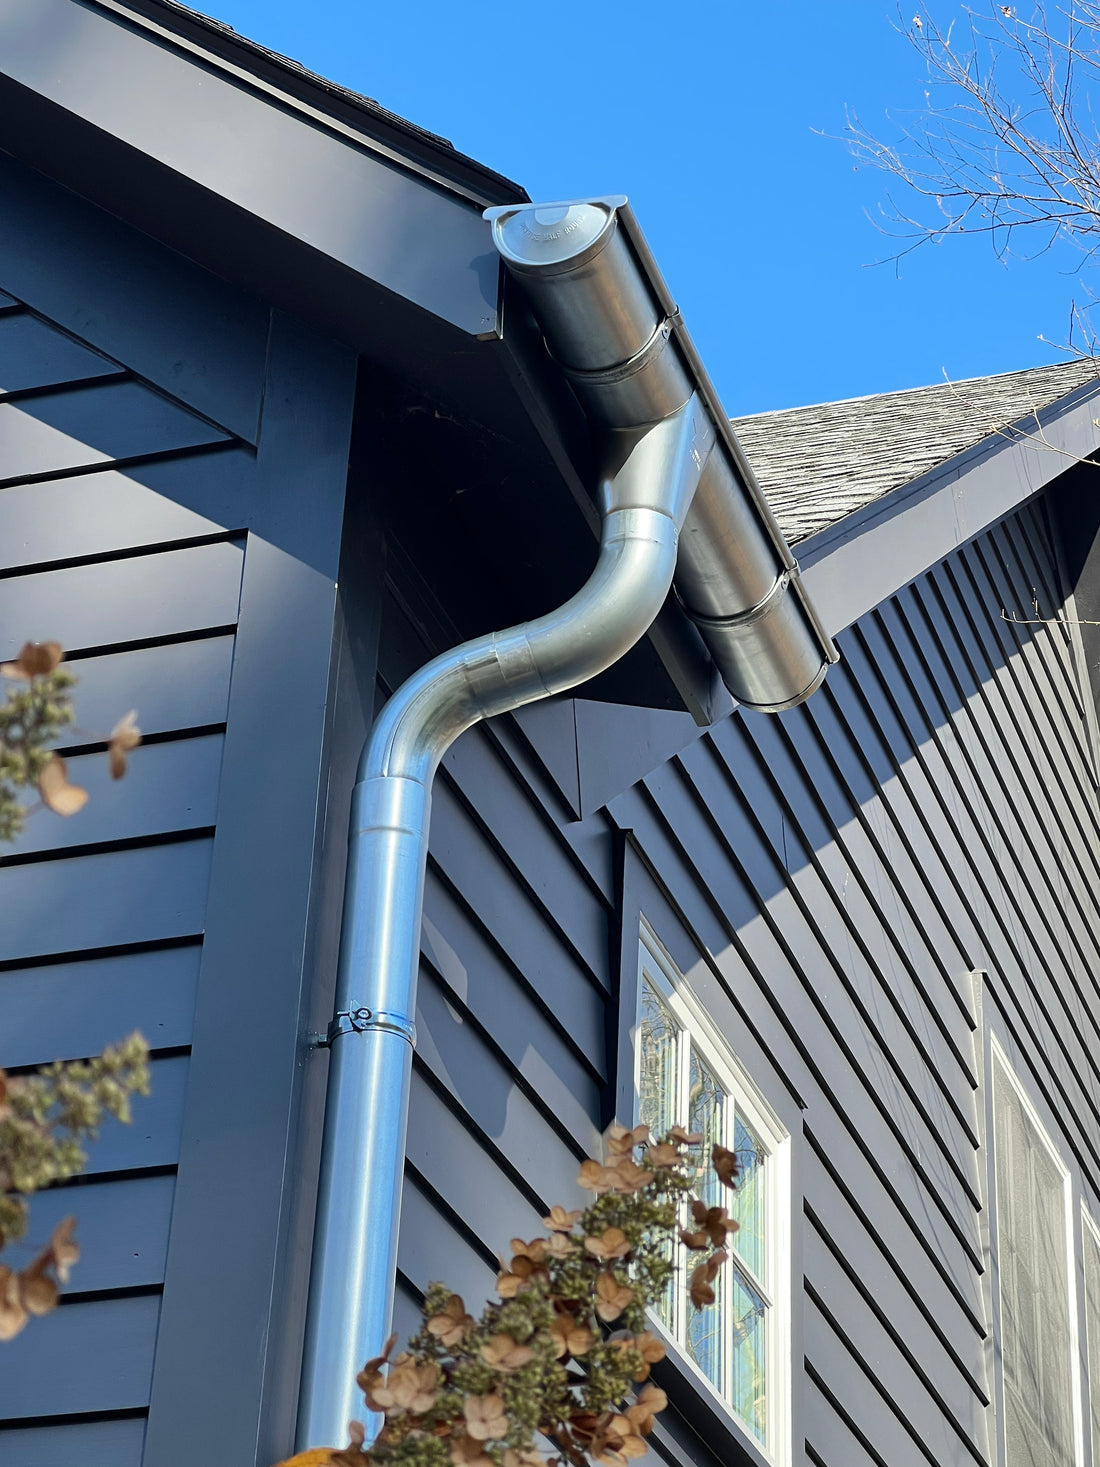 4"x10' Galvanized Steel Downspout